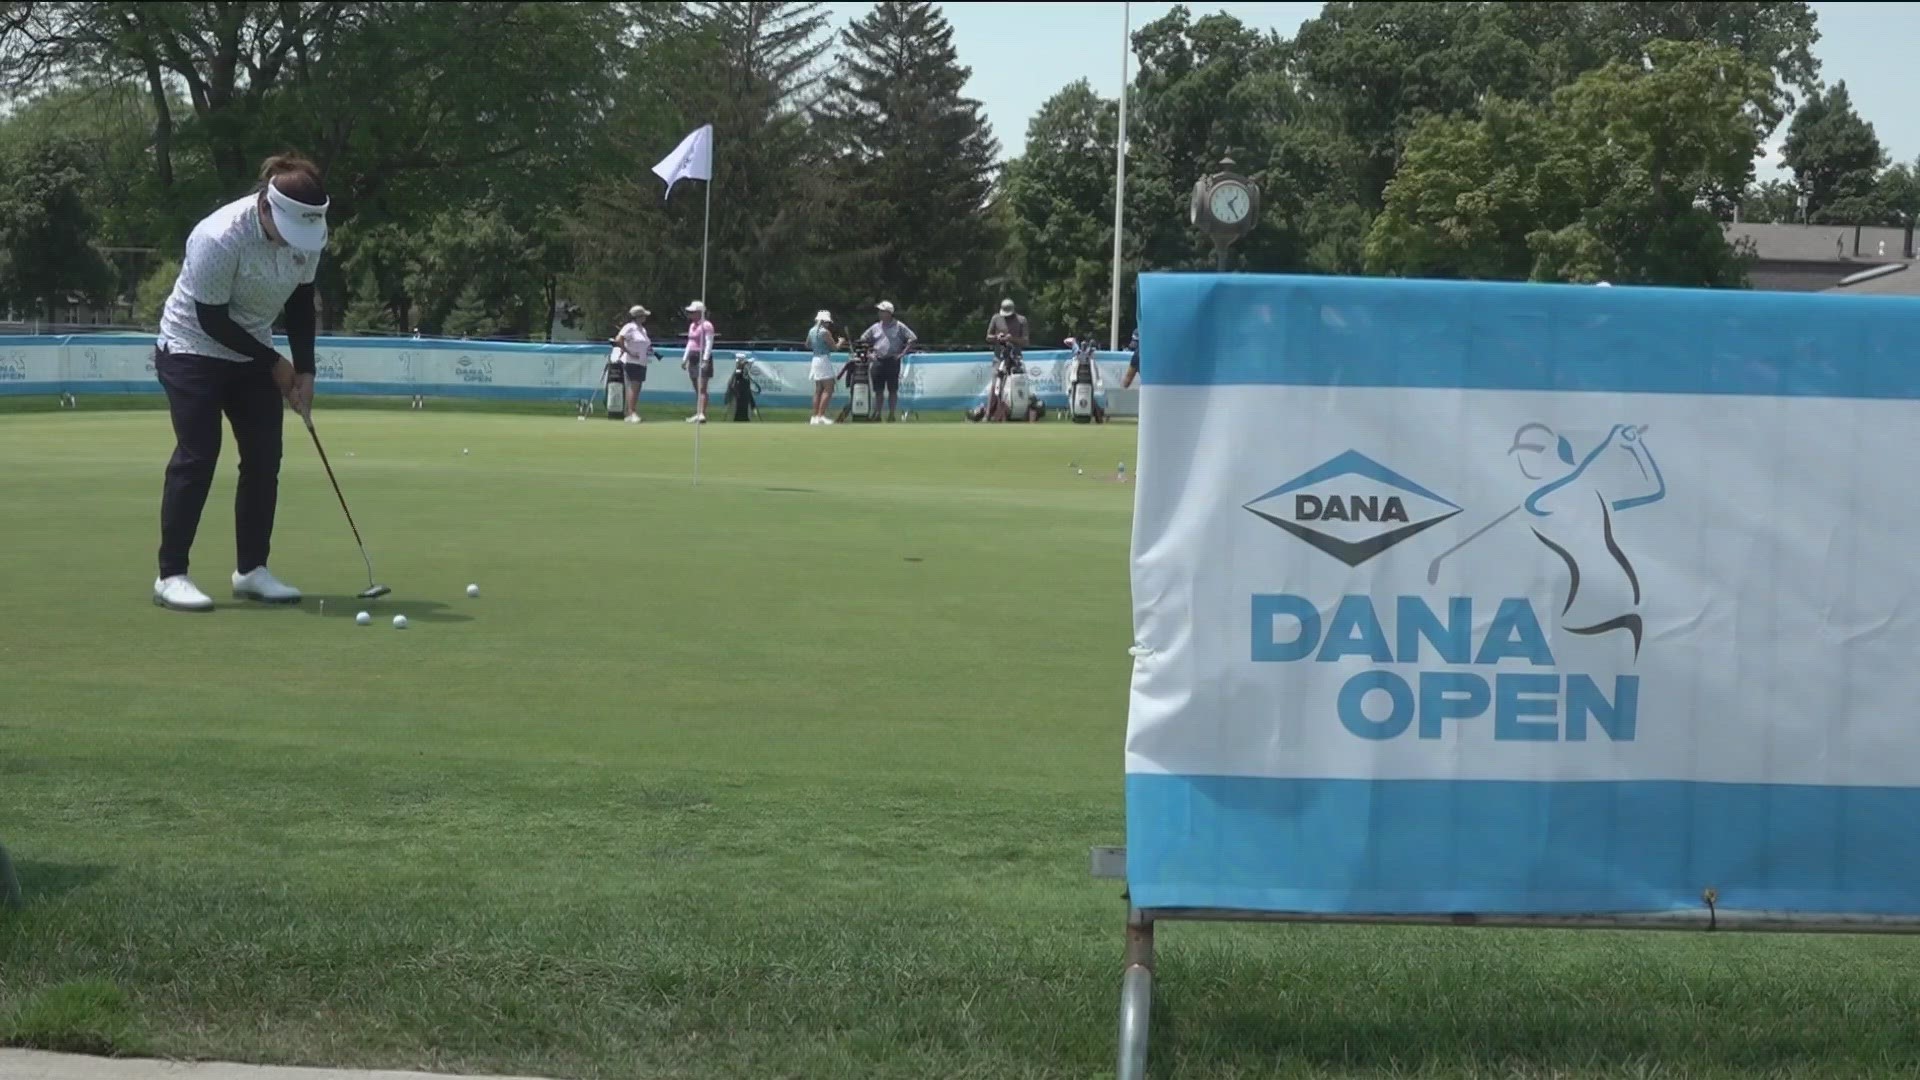 With less than 24 hours to go before Highland Meadows opens to the public, here are things to know before the Dana Open tees off.